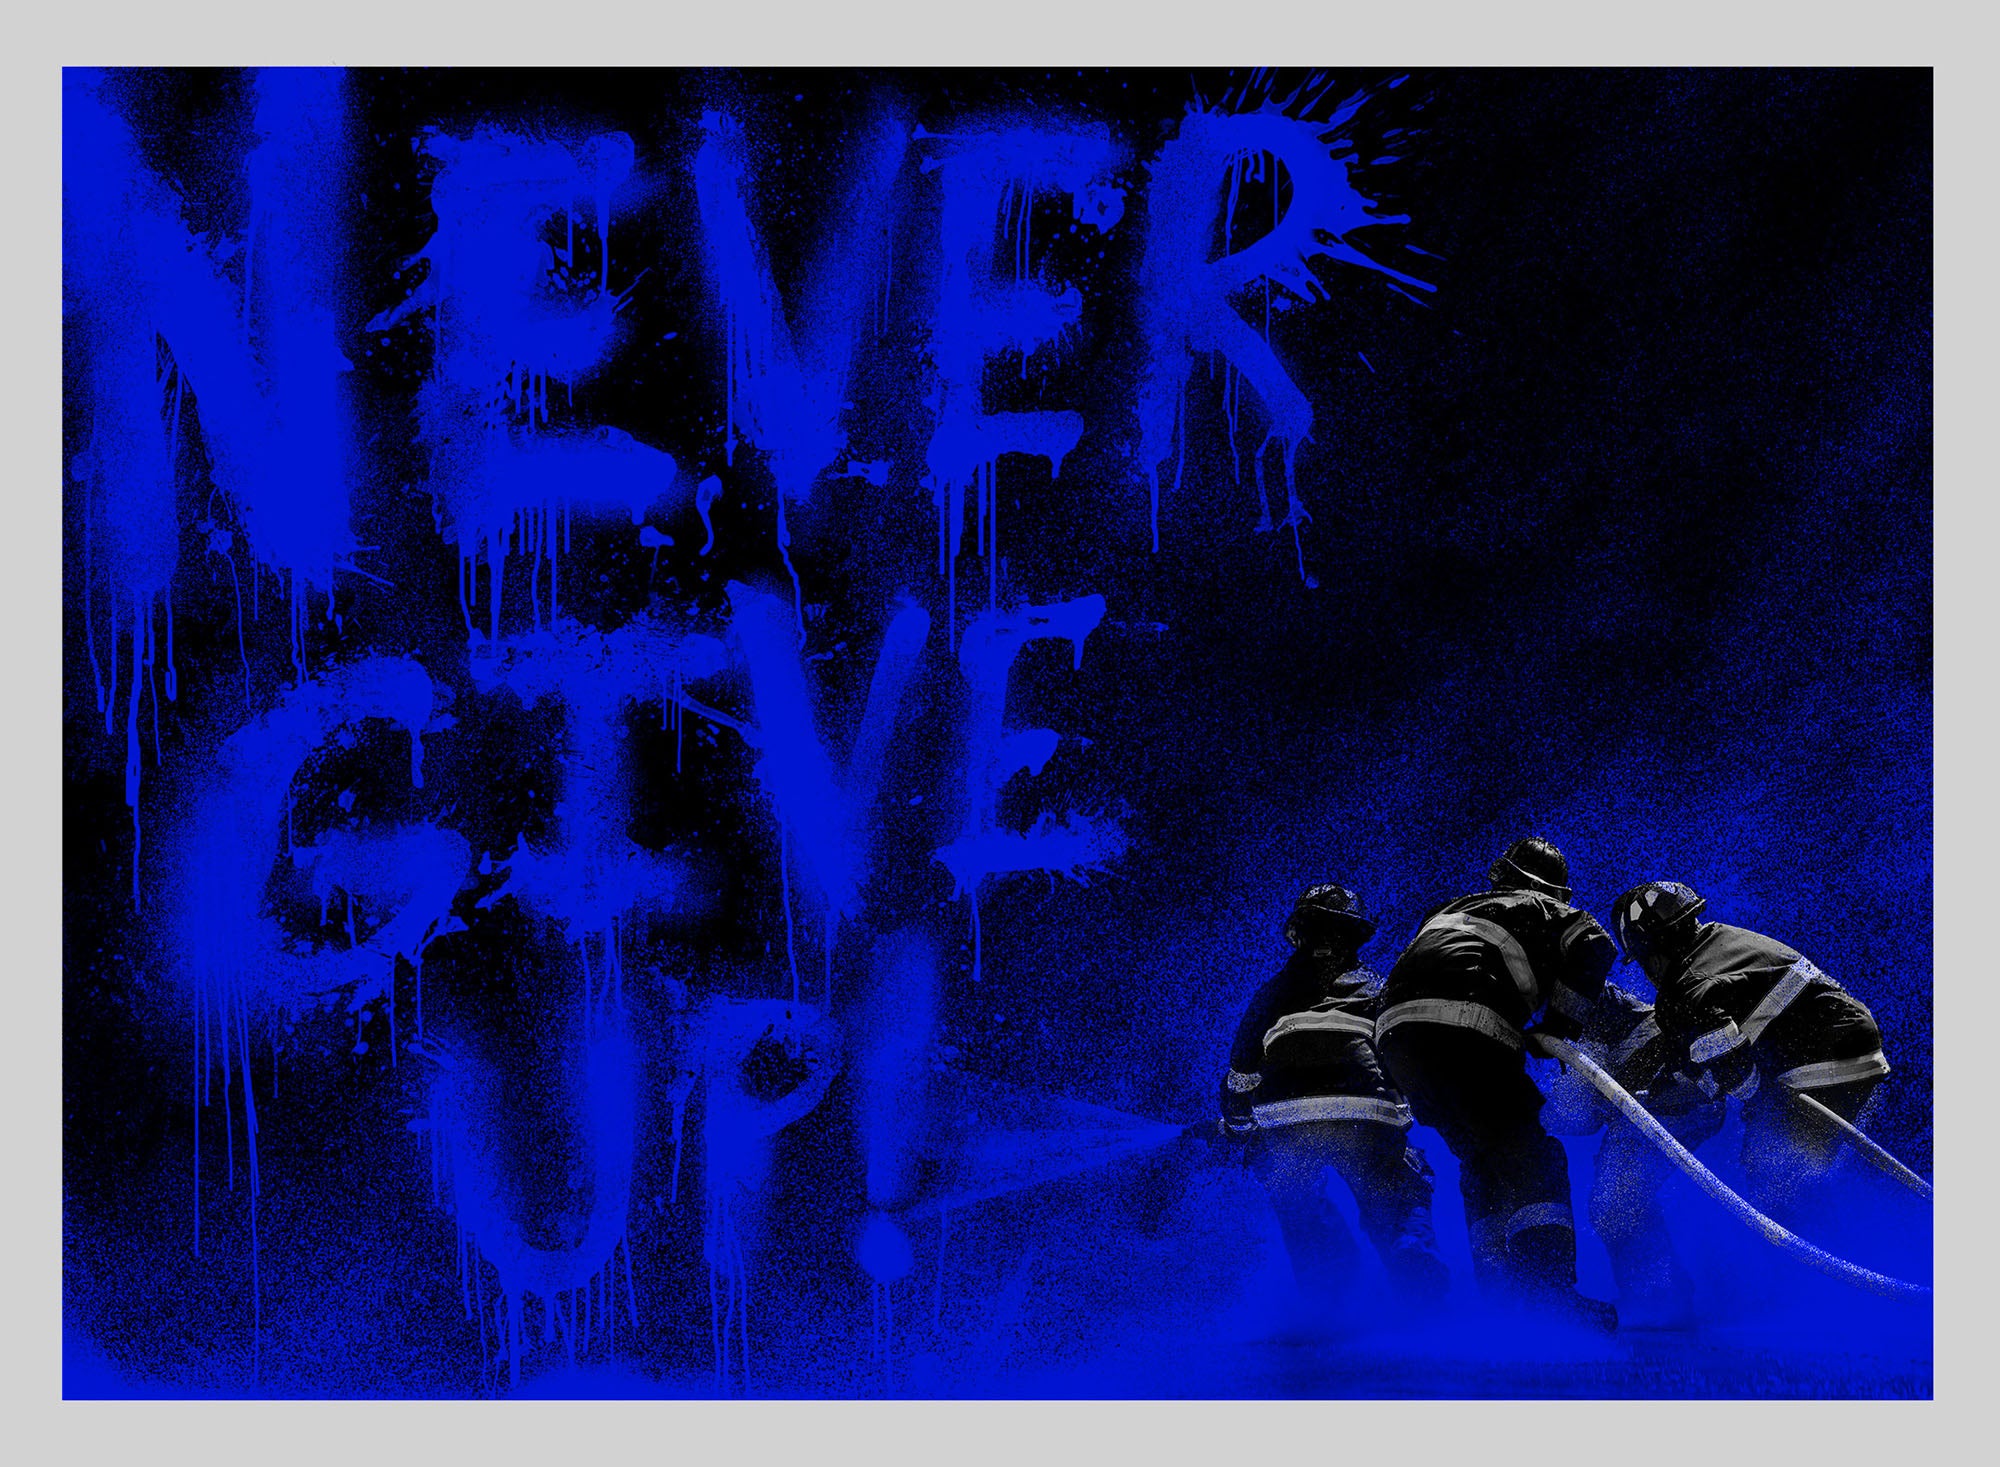 Title: Never Give Up! (2018 Set of 3 (1)RED (1)WHITE AND (1)BLUE)  Artist: Mr. Brainwash  Edition: Limited Edition screenprint on hand torn archival art paper of only 40 copies per color. Signed, numbered and thumb printed on the back.  FULL SET OF 3 - (1)RED (1)WHITE AND (1)BLUE  Type: Screenprint poster on hand torn archival art paper  Size:  22.4" x 26.4"  Notes:  Released in honor of the Los Angeles Firefighters in regards to the recent Woosley fires that have devastated Southern California.